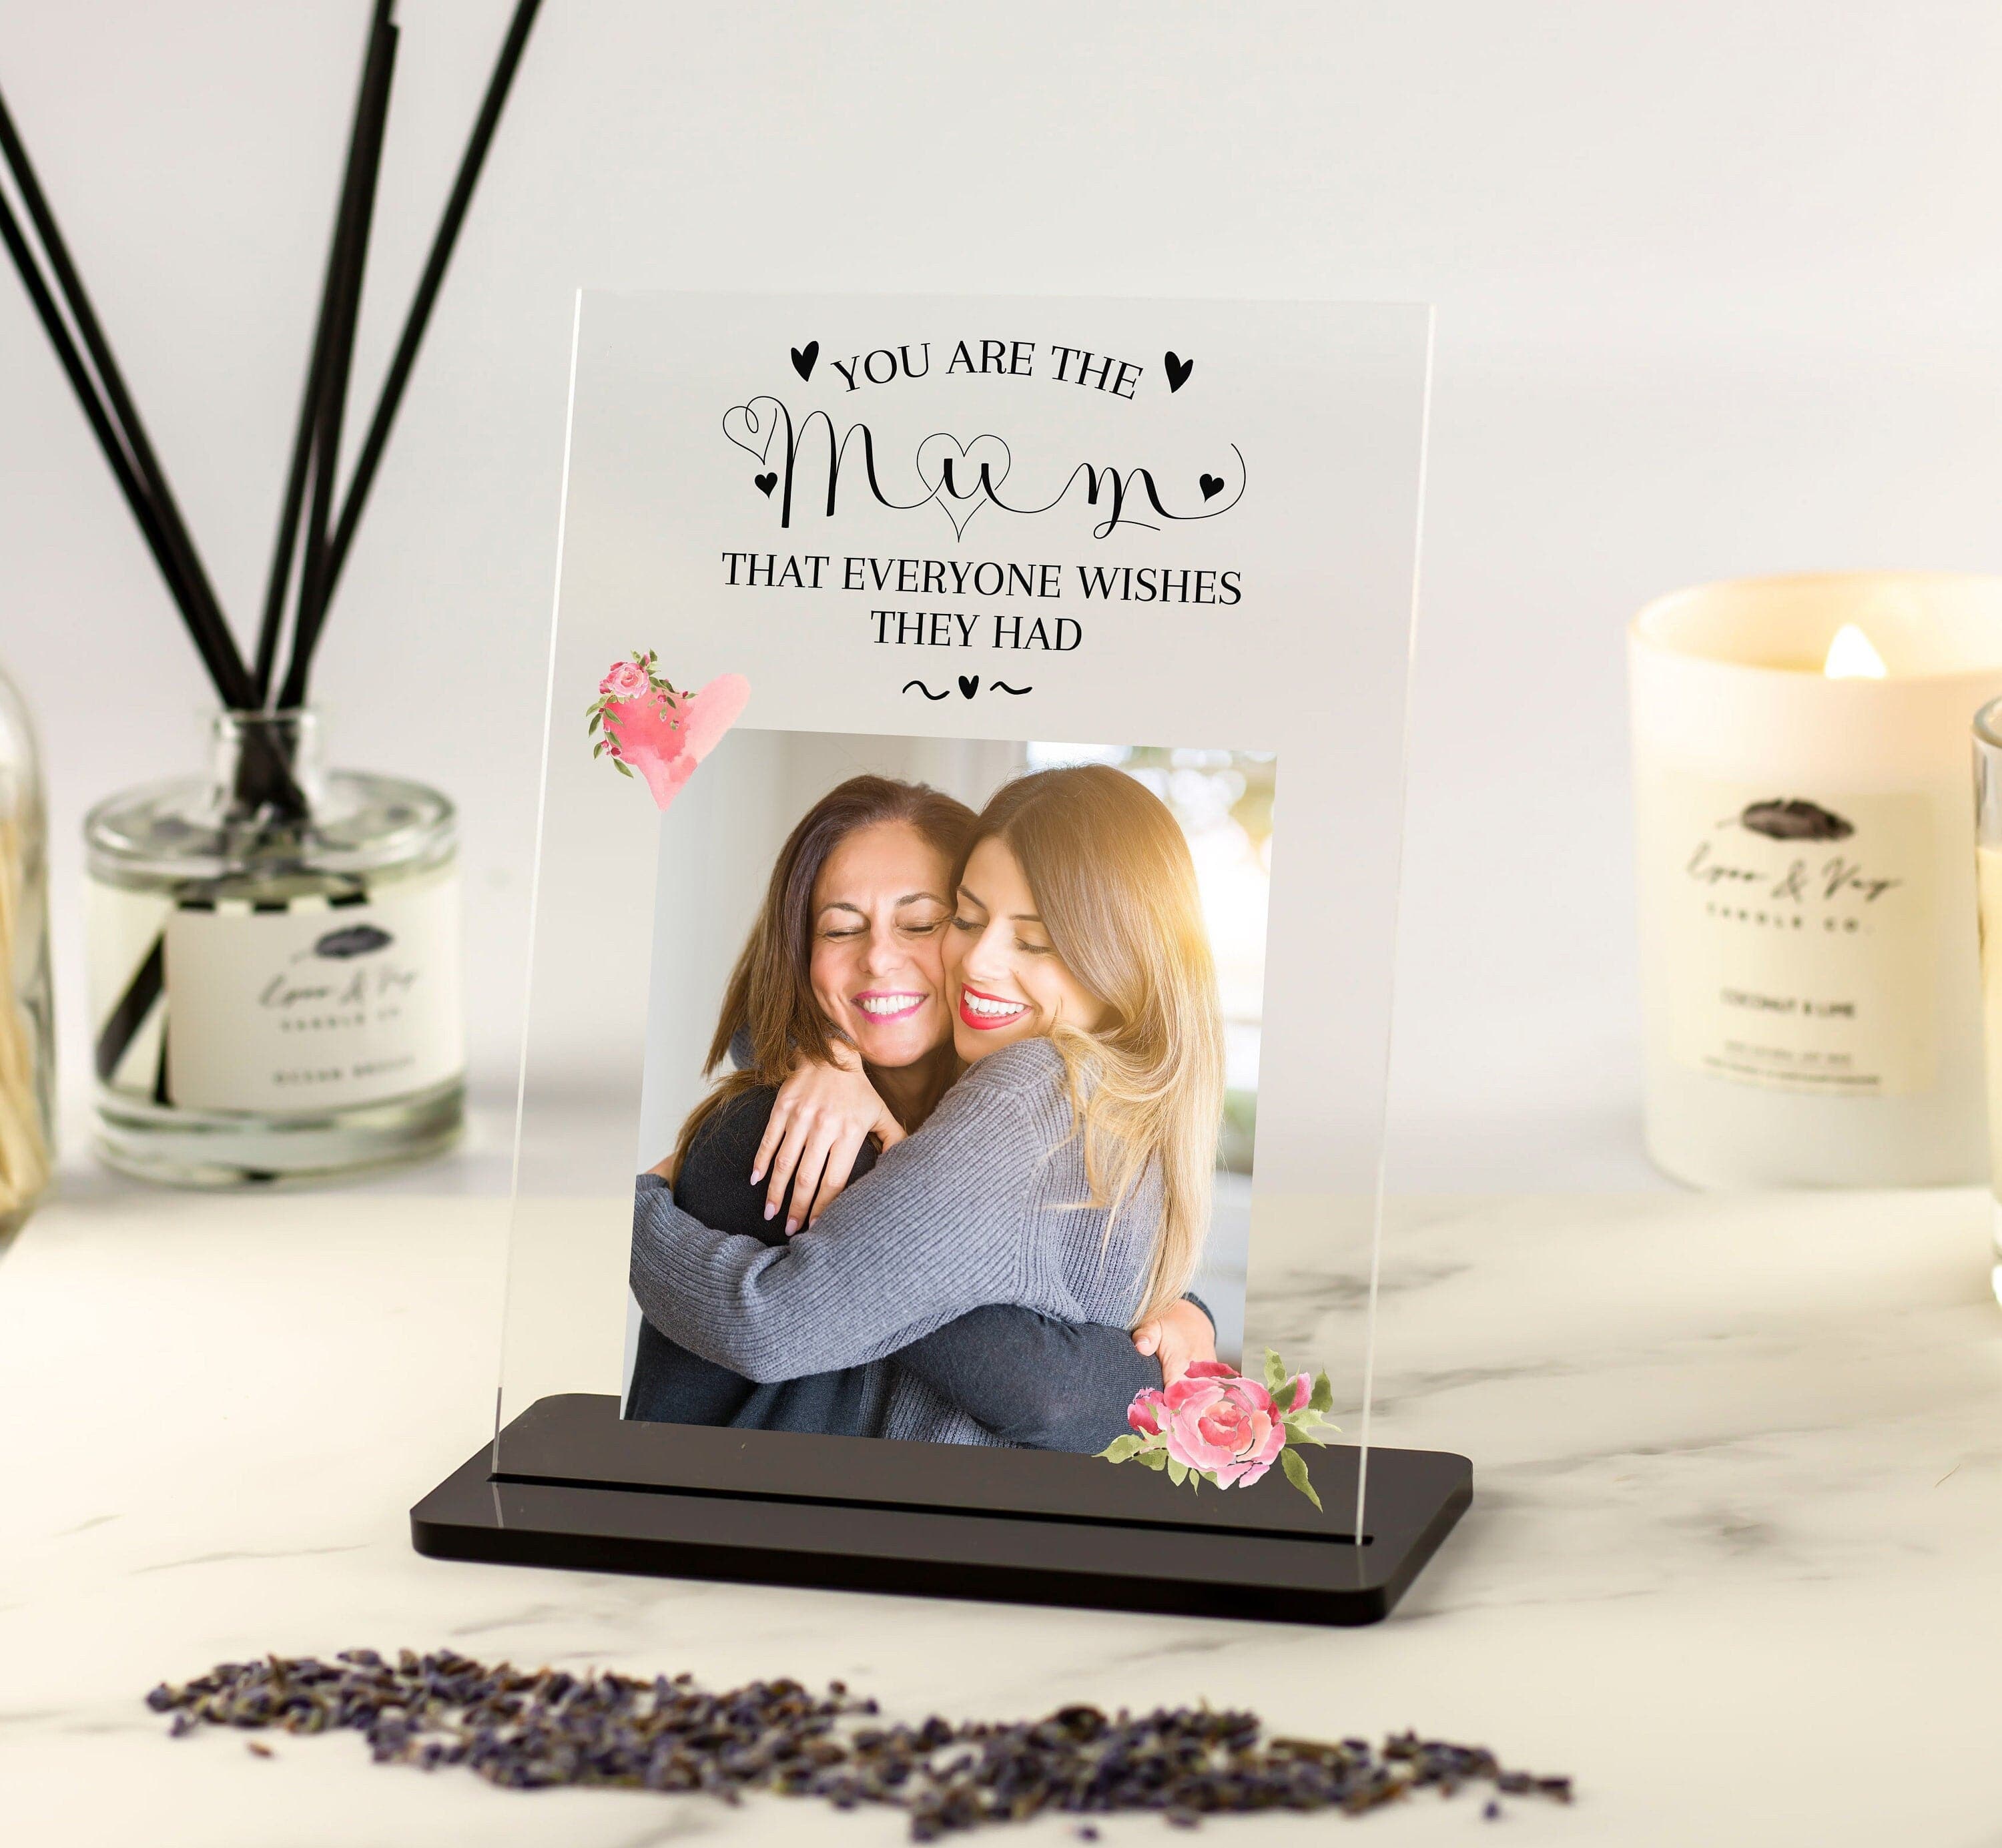 Personalised Mum Gift, Mother and Daughter Print, Unique Mothers Day gift, Mum Birthday Gift, Custom Photo Frame Acrylic Plaque